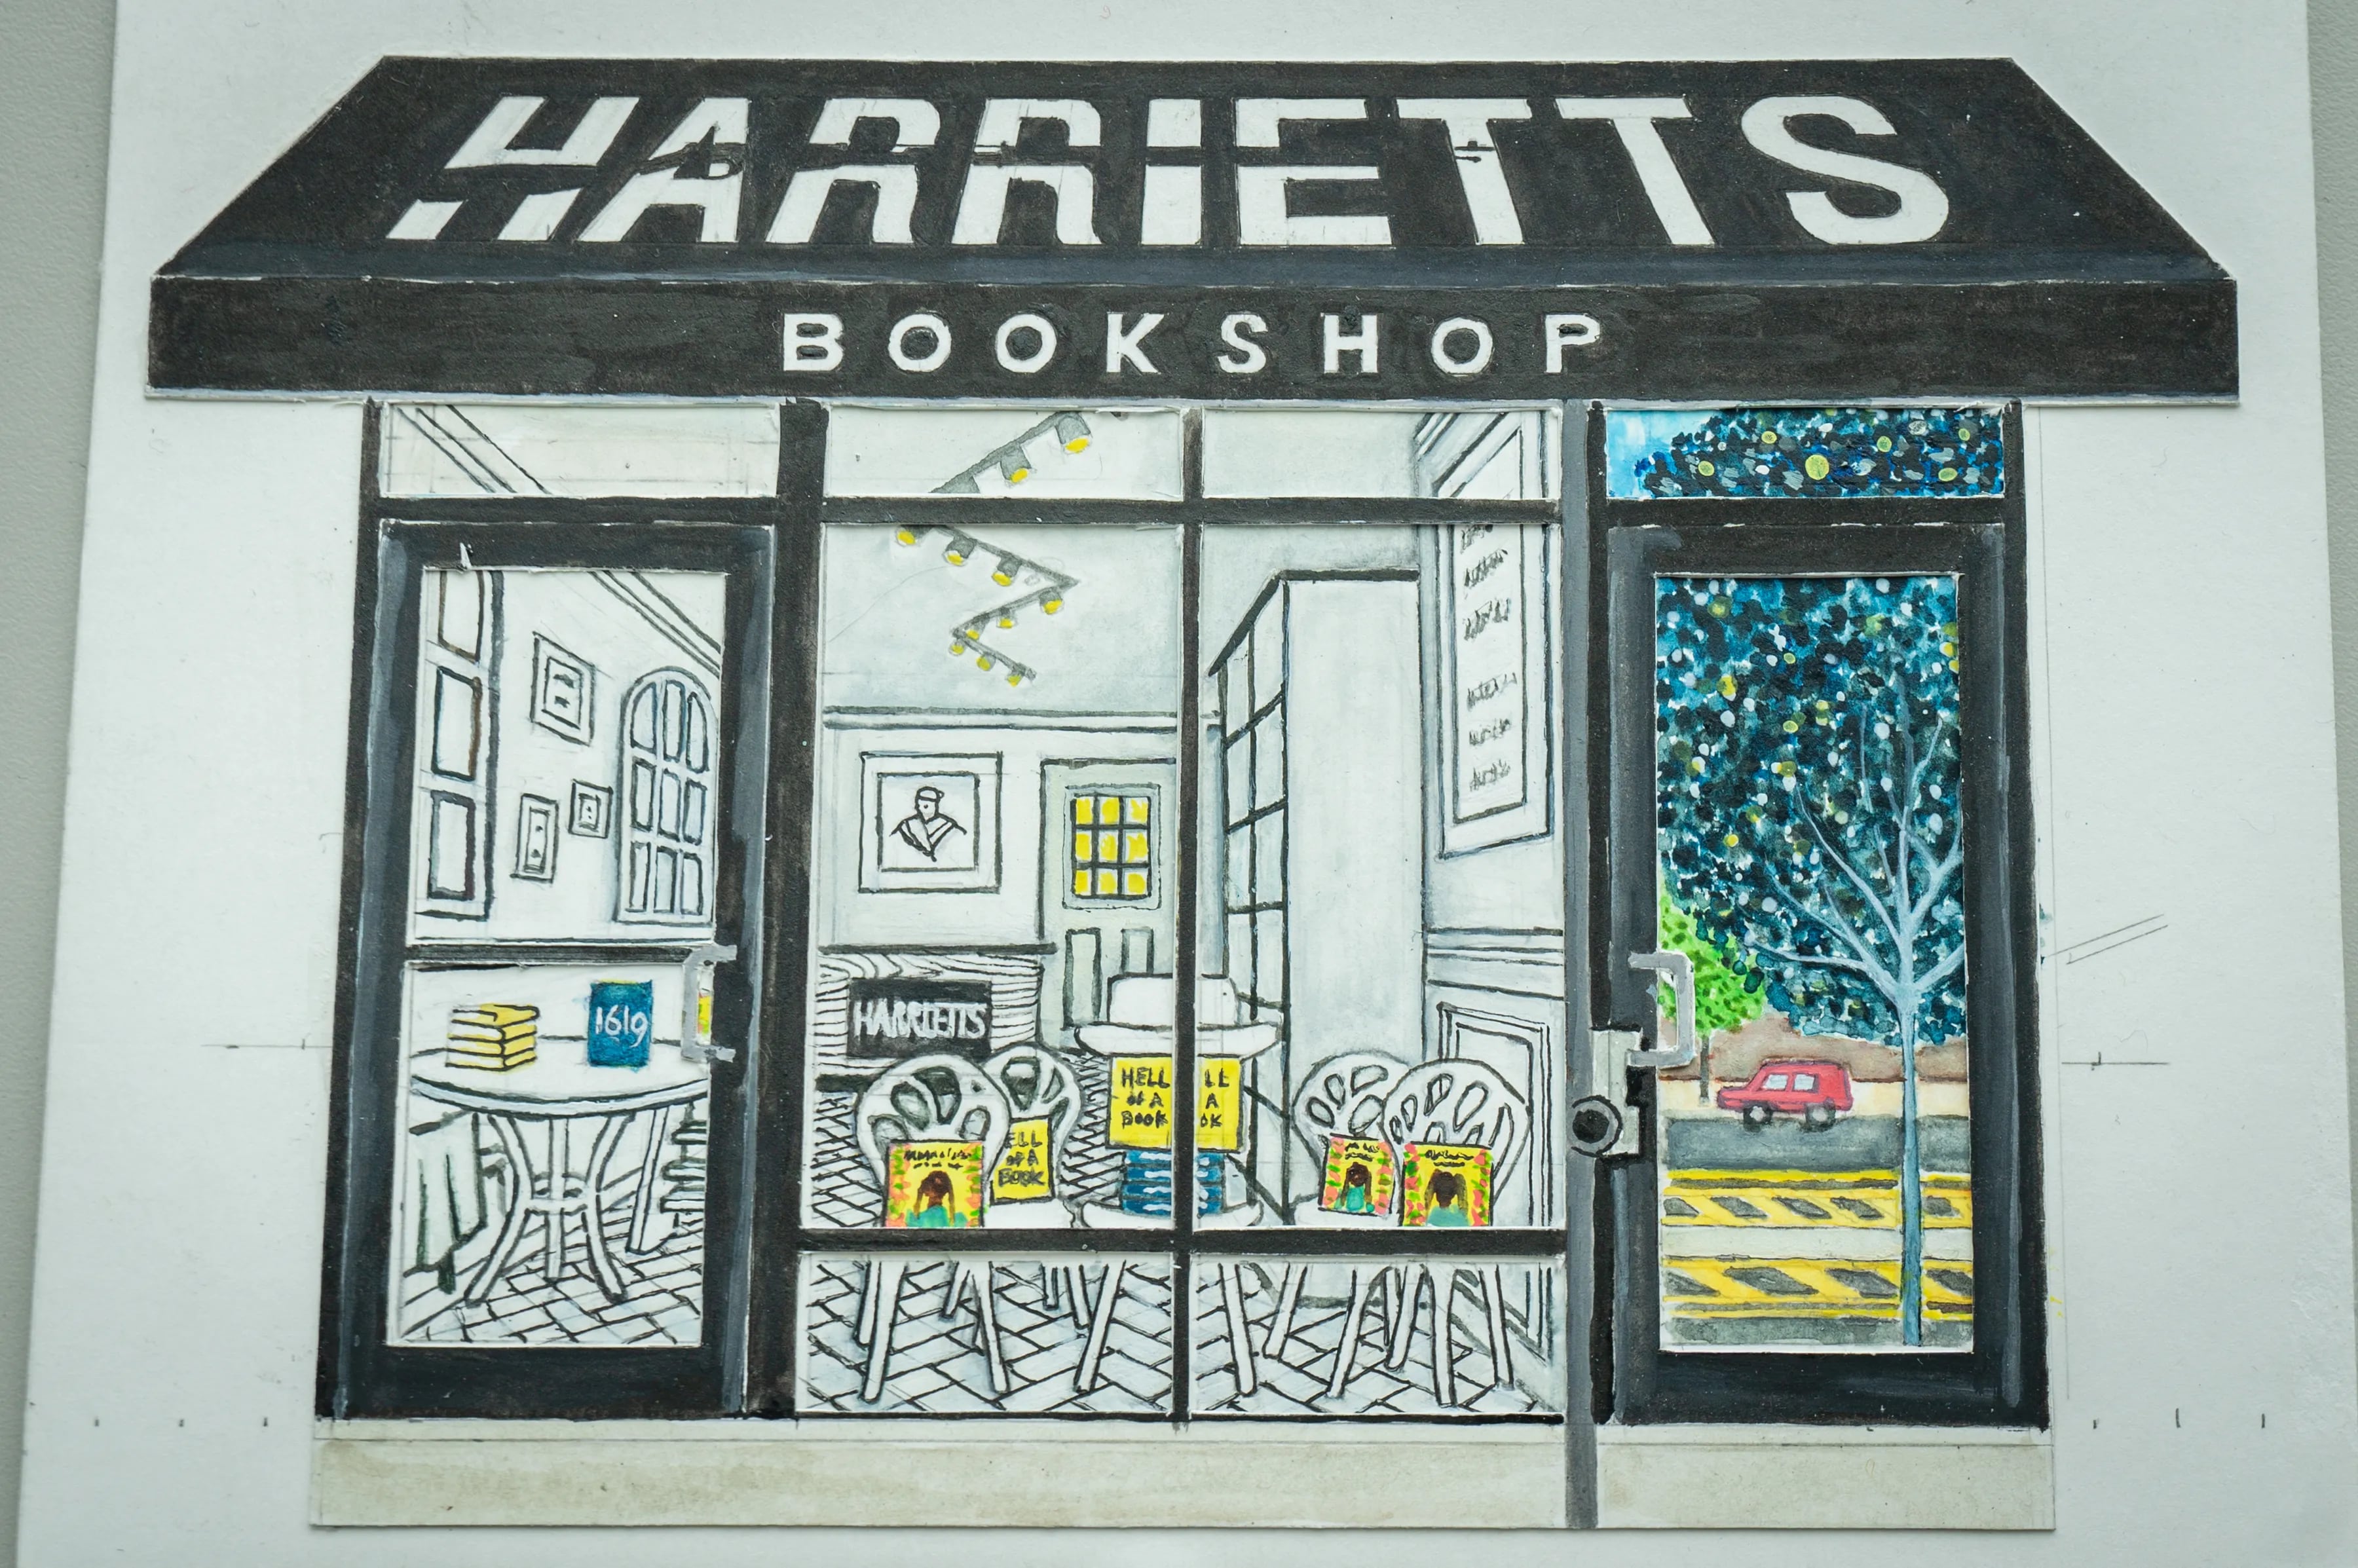 Harrietts Bookshop by visual artist Henry Crane who painted and designed the new Philadelphia Bookstore Map, Wednesday, June 21, 2023.